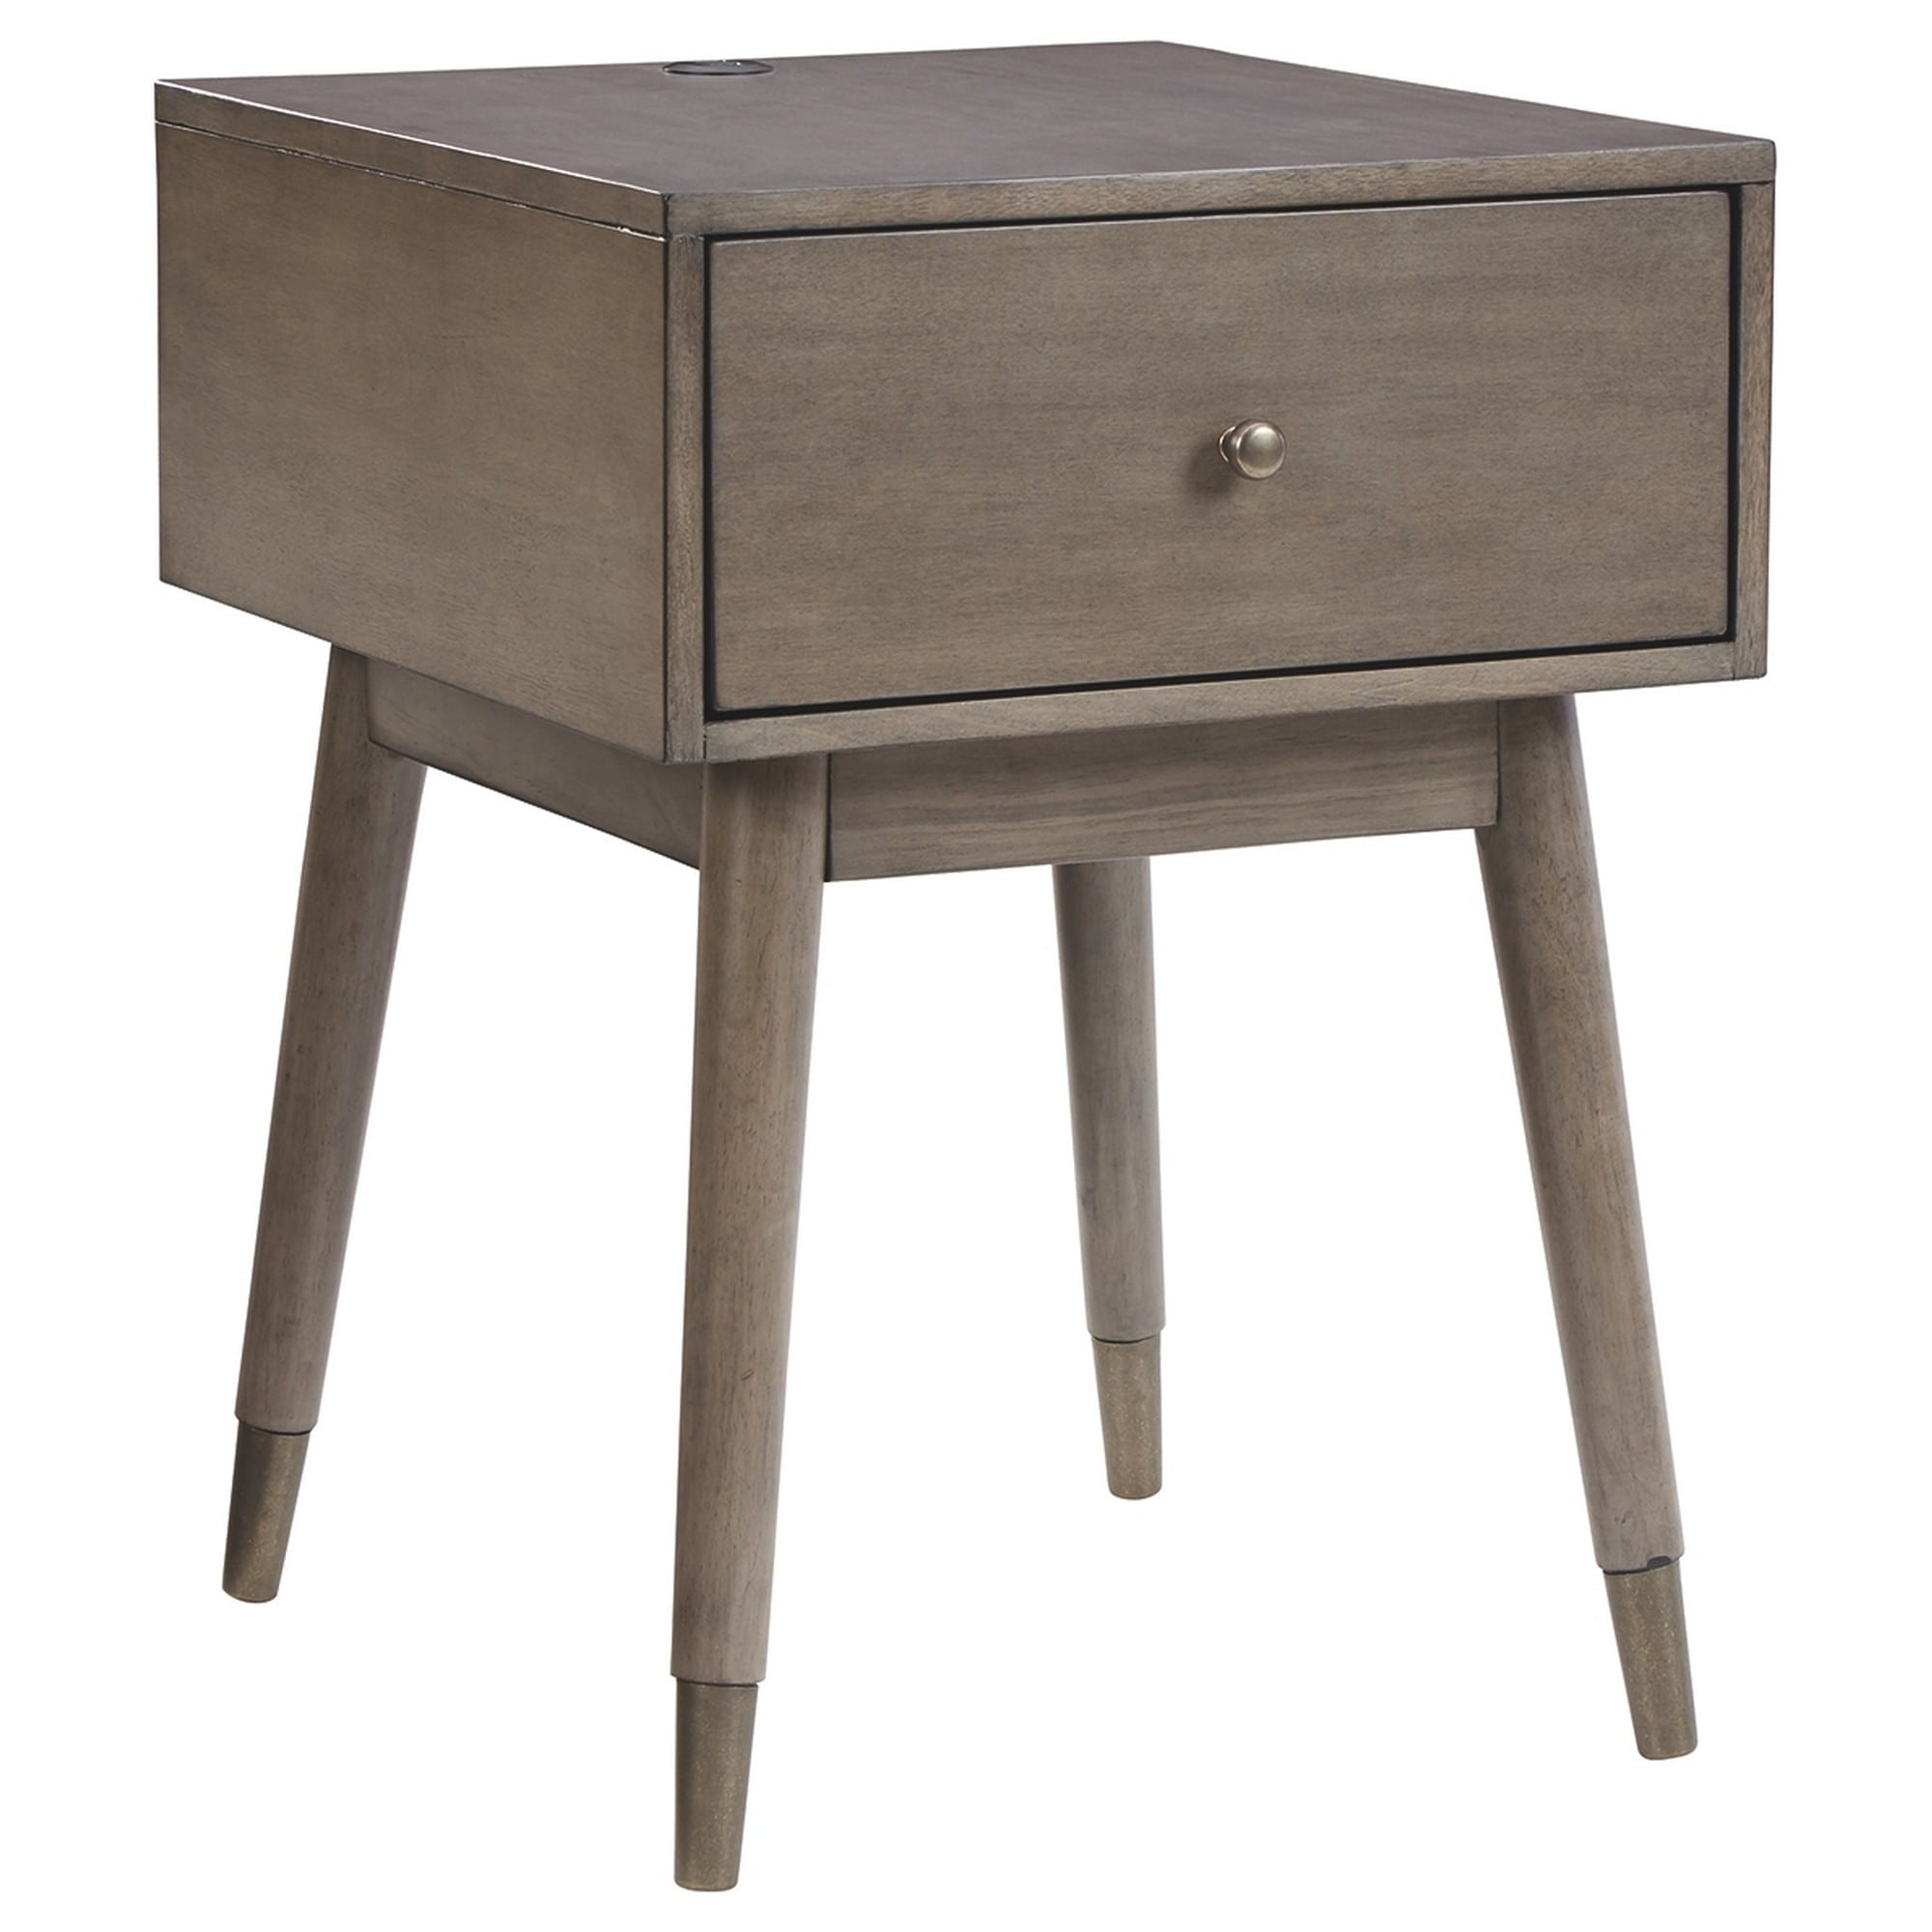 1 Drawer Wooden Accent Table with USB Ports and Splayed Legs, Taupe Gray